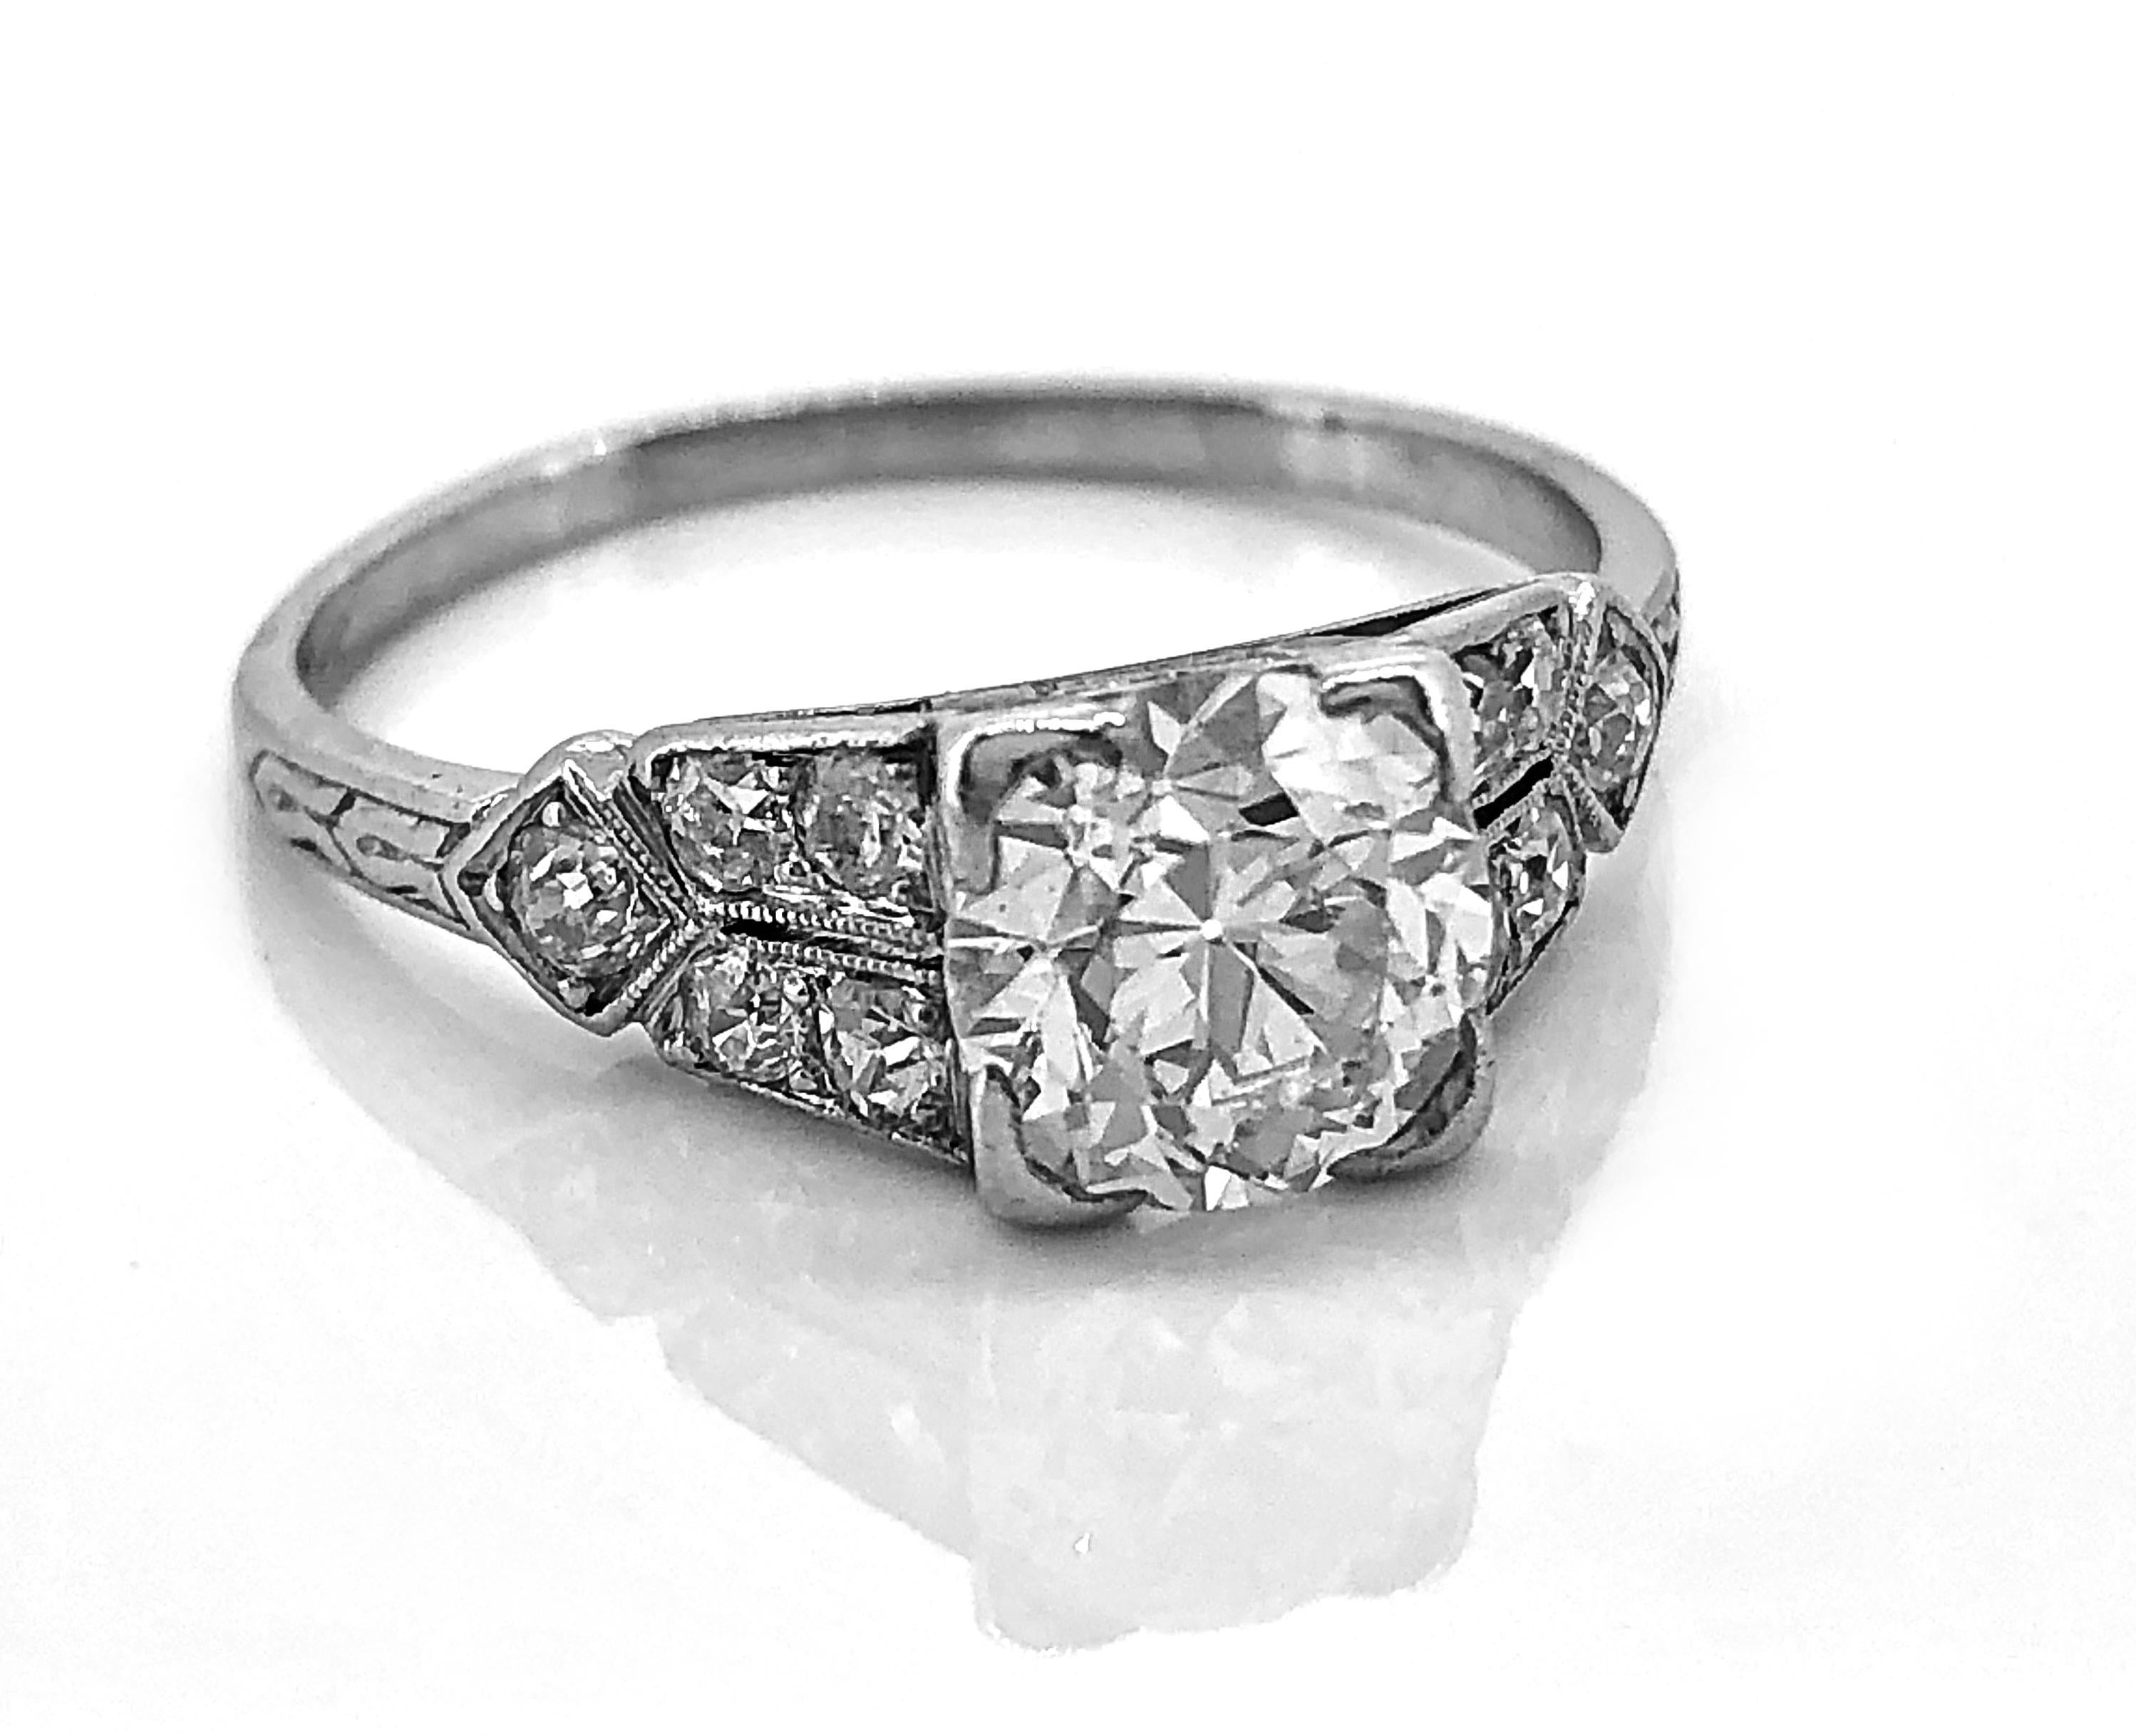 An Edwardian antique engagement ring featuring a 1.55ct. apx. Old Mine cut center diamond with SI1 clarity and I-J color. It is crafted in 18K white gold and has the typical filigree and engraving that is so popular from that time period. The shank